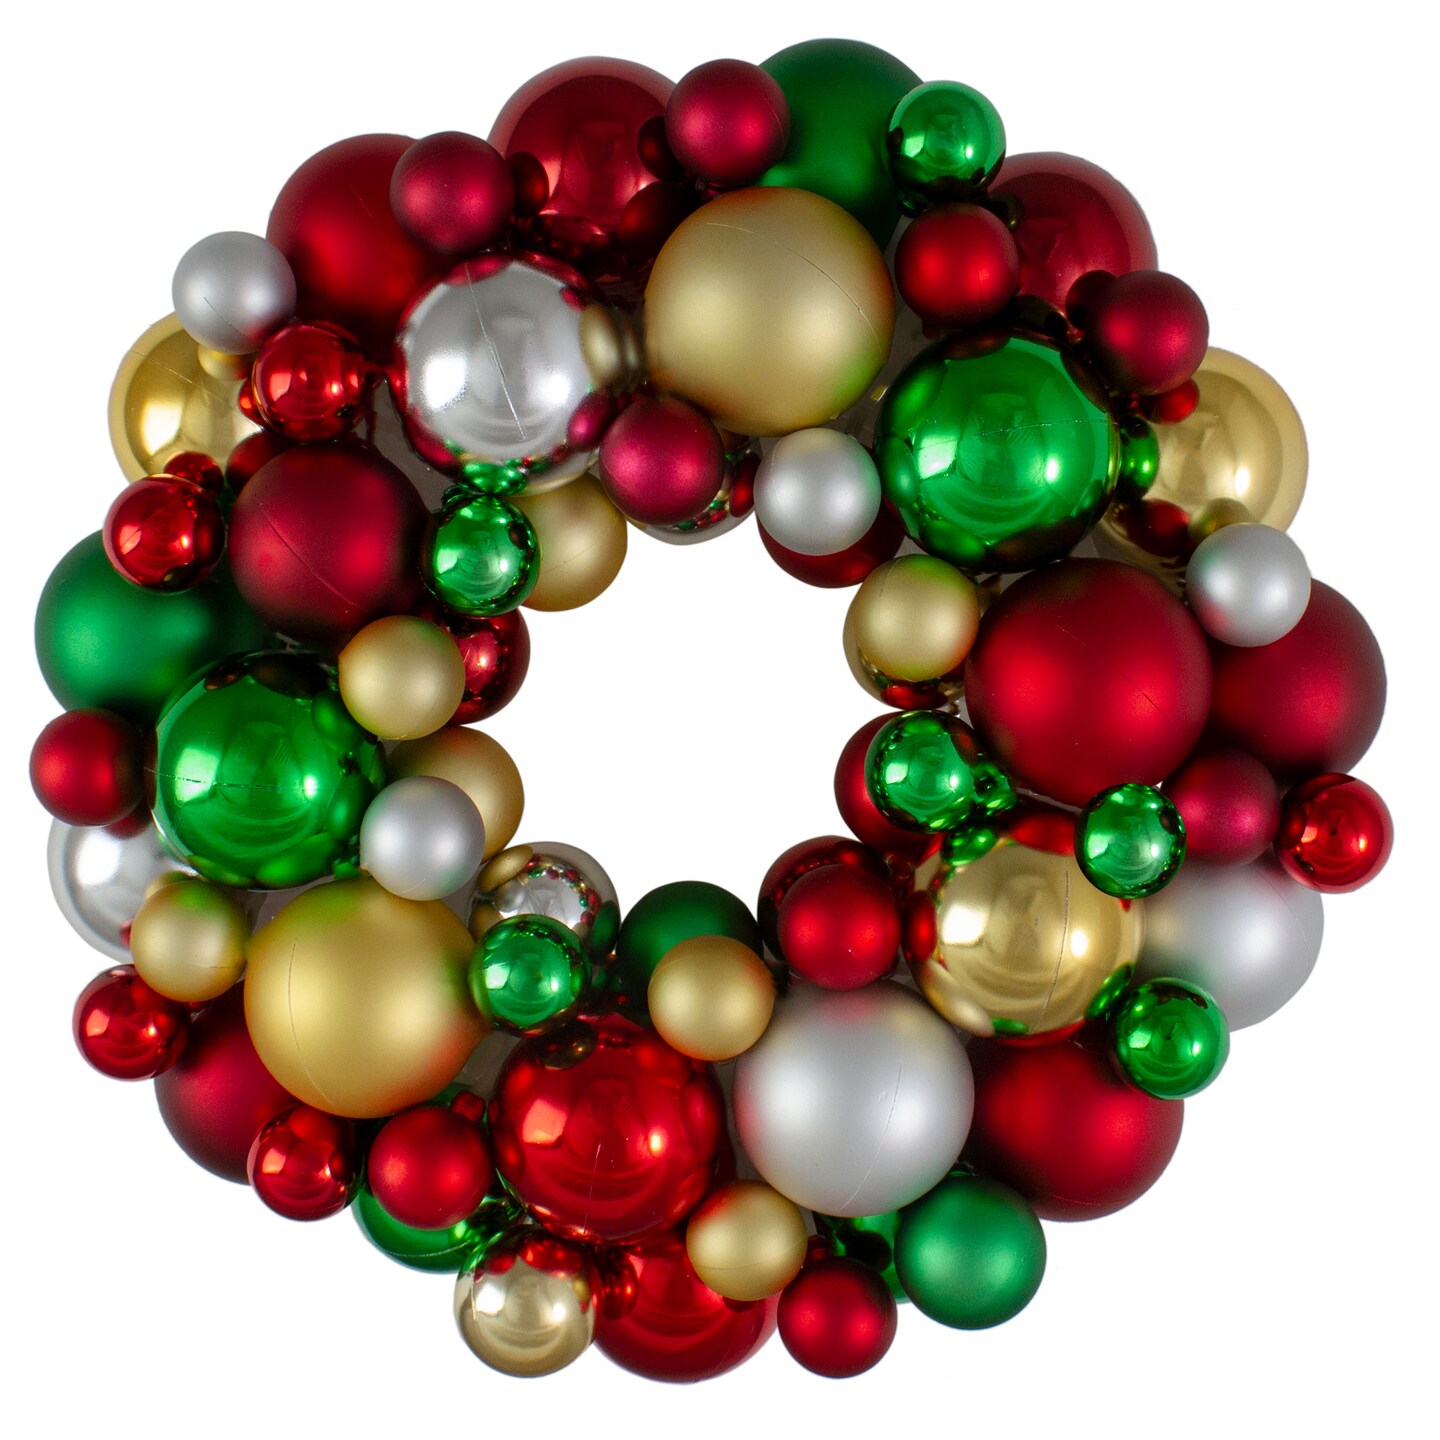 Northlight Traditional Colors 2-Finish Shatterproof Ball Christmas Wreath, 13-Inch